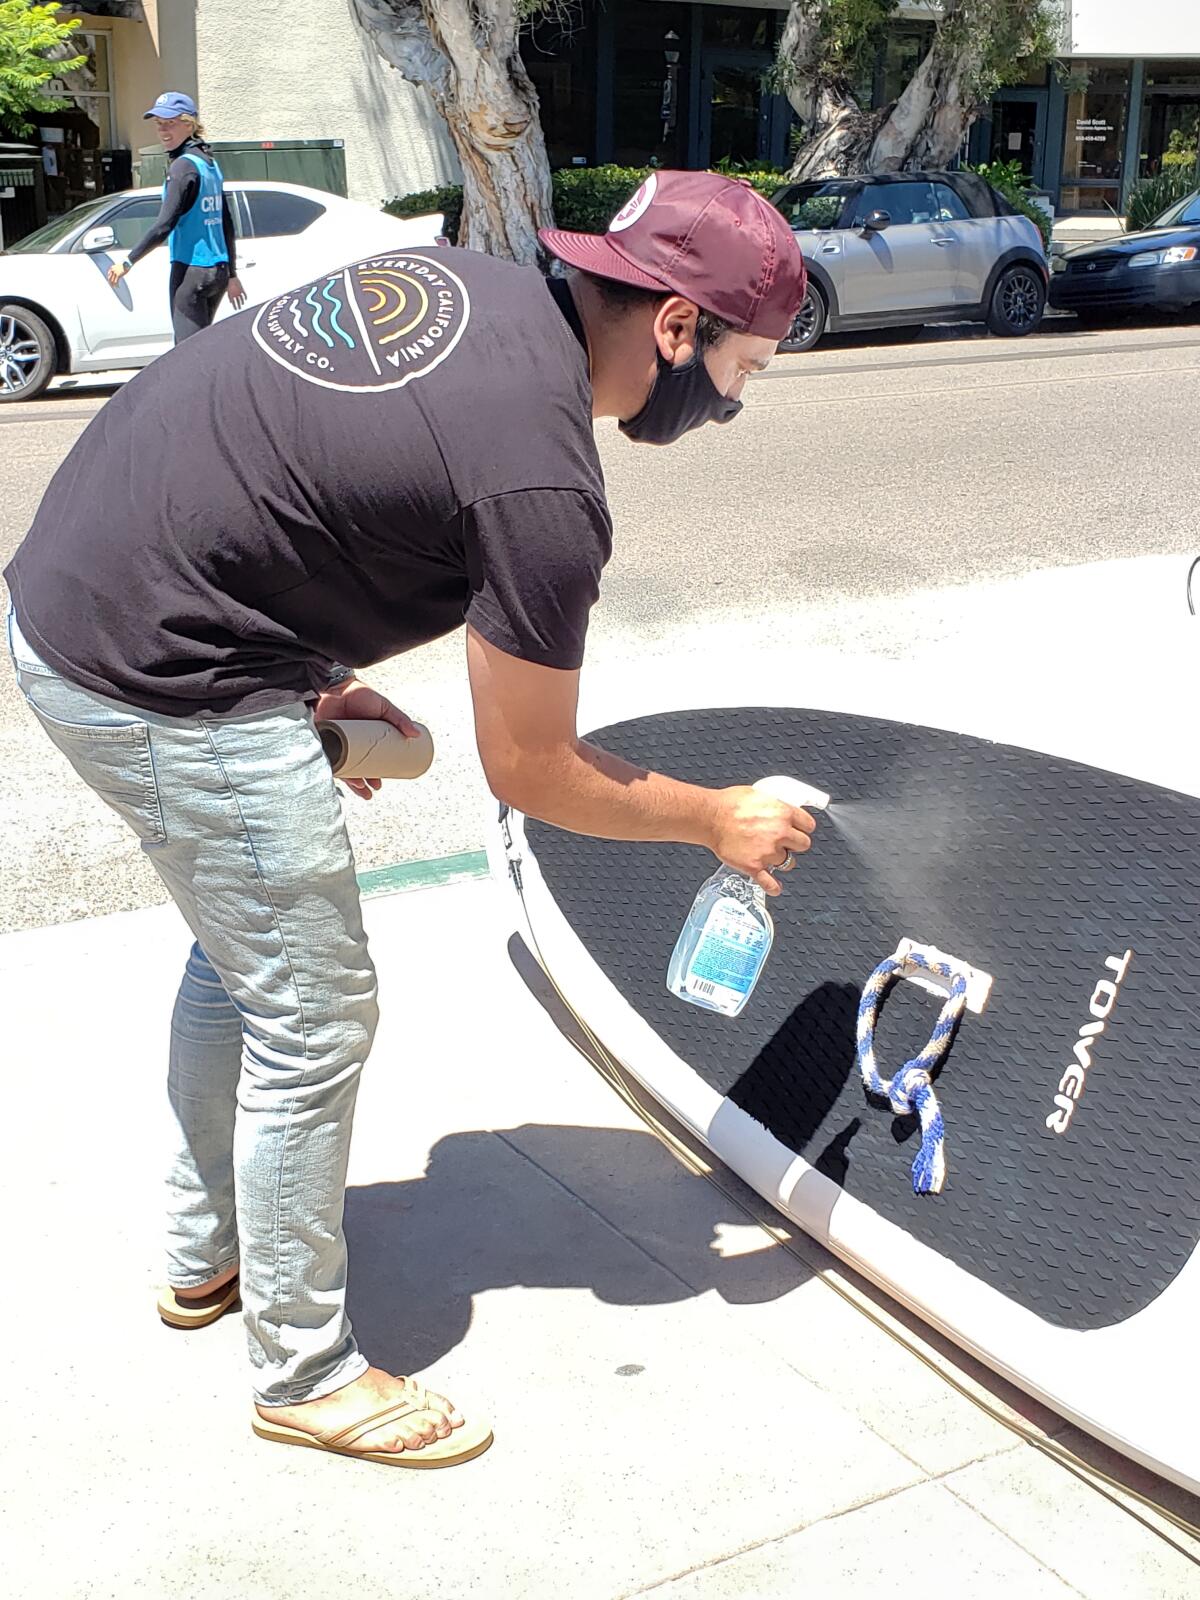 Everyday California General Manager Kama Hurwitz cleans a paddleboard with sanitizing spray.